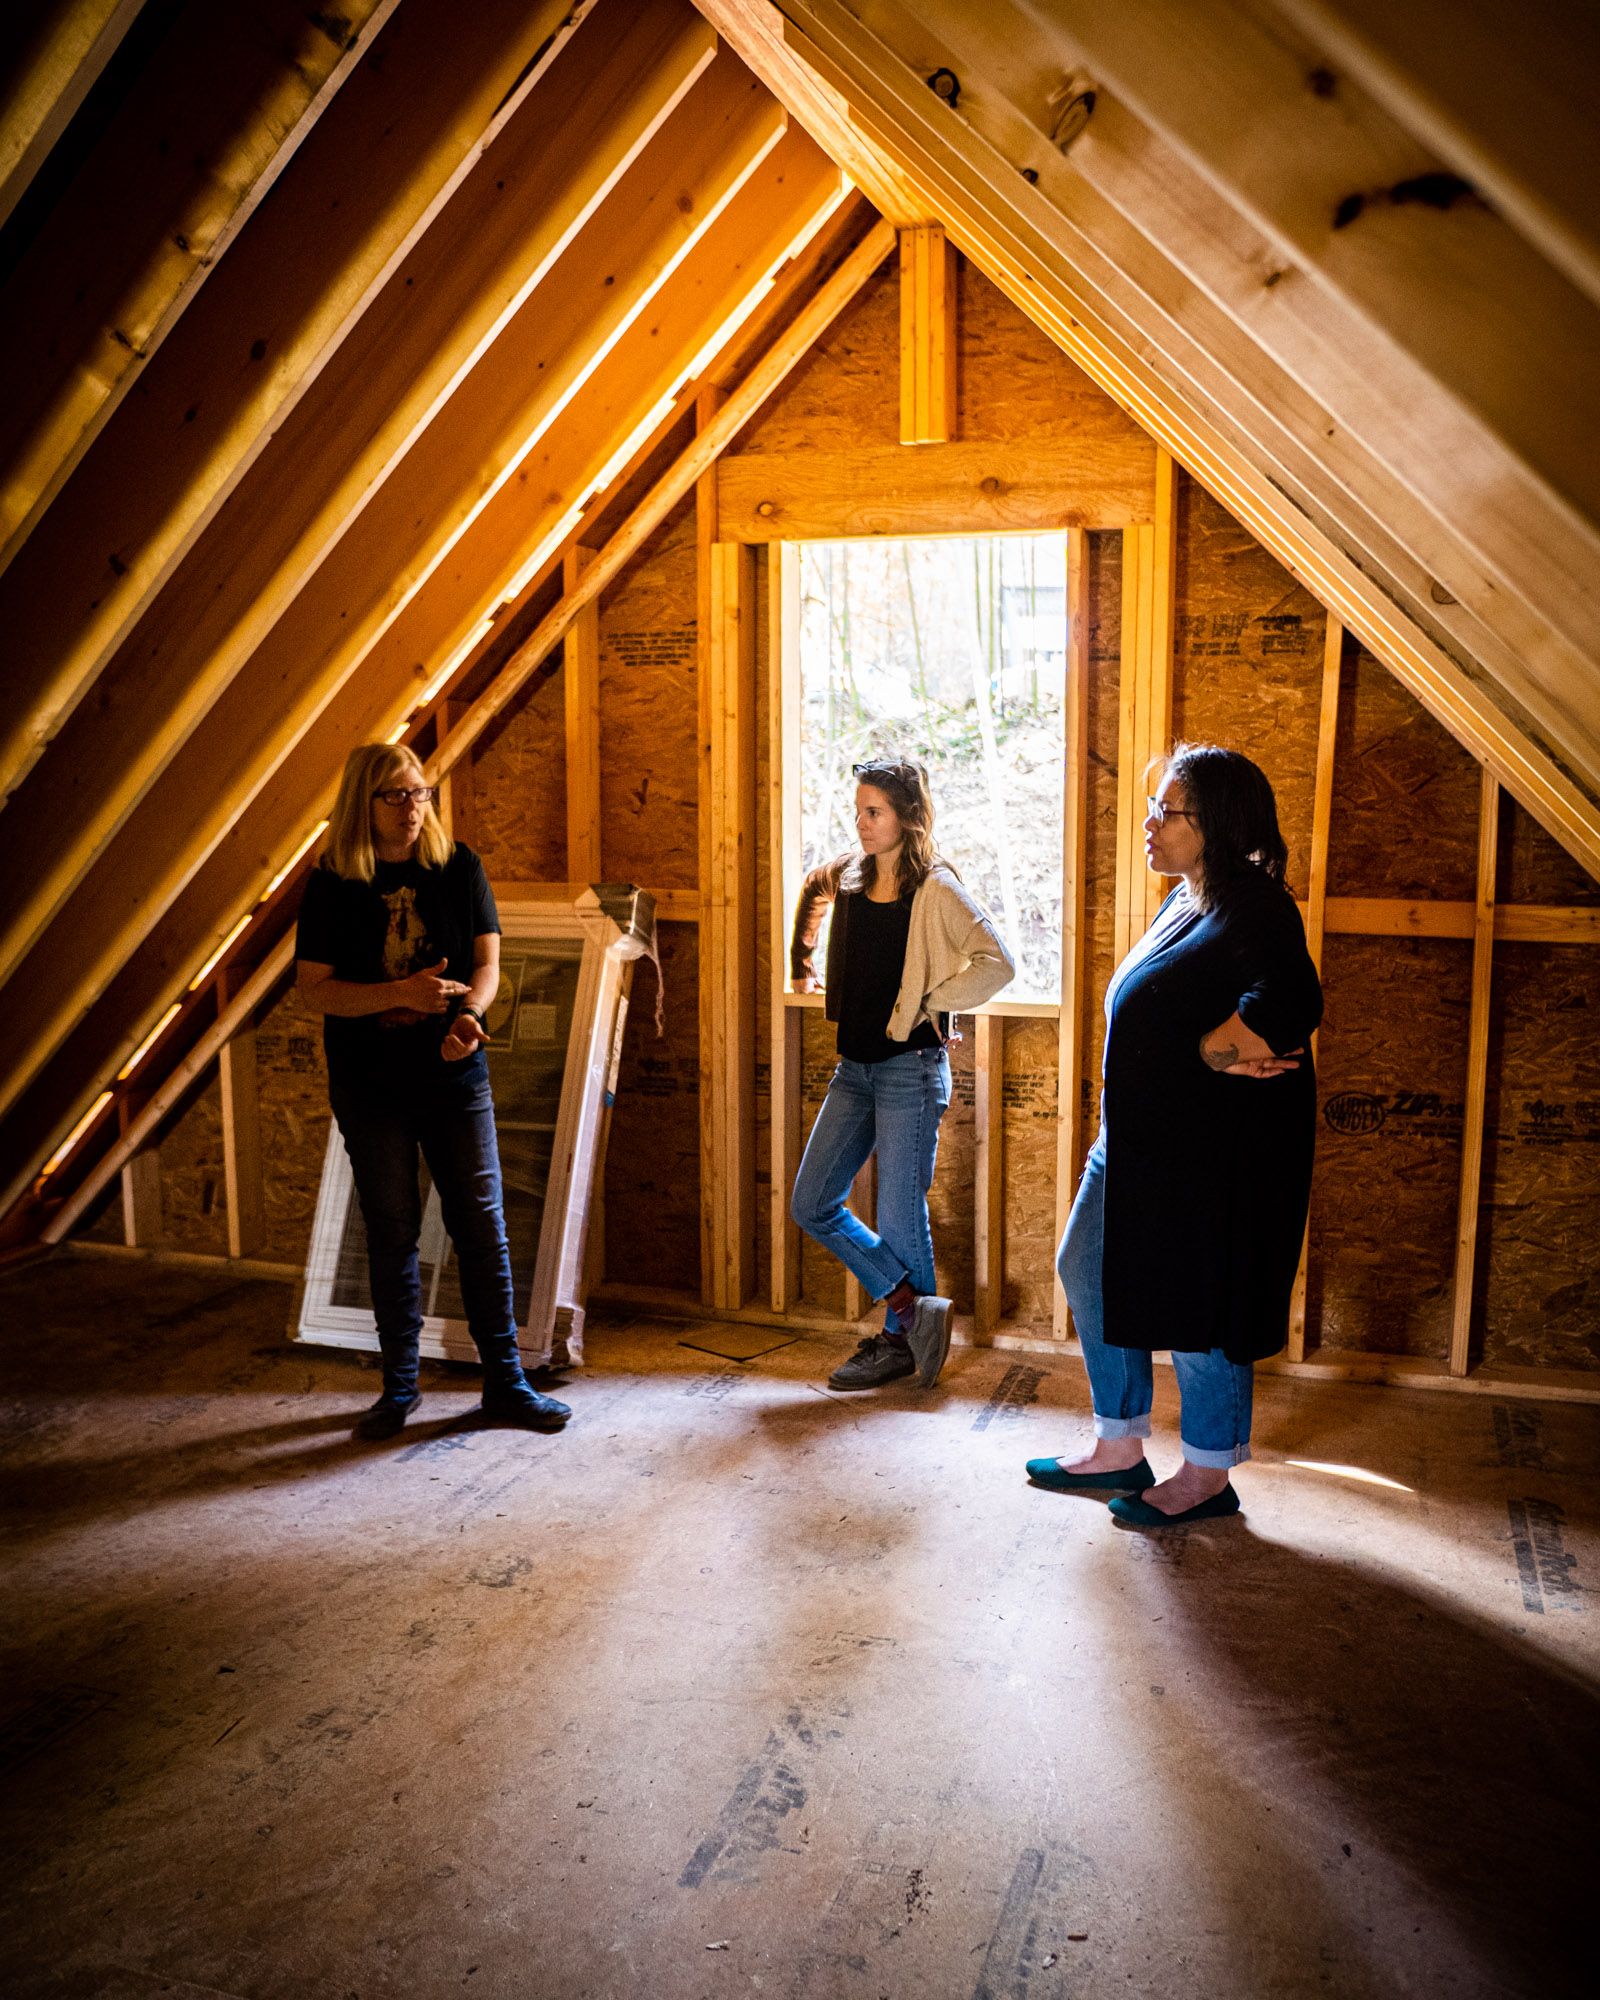 Image of BeLoved's Amy Cantrell, East Fork Community Impact Manager Davia and East Fork Copywriter, Jasmin, standing in a partially finished home 